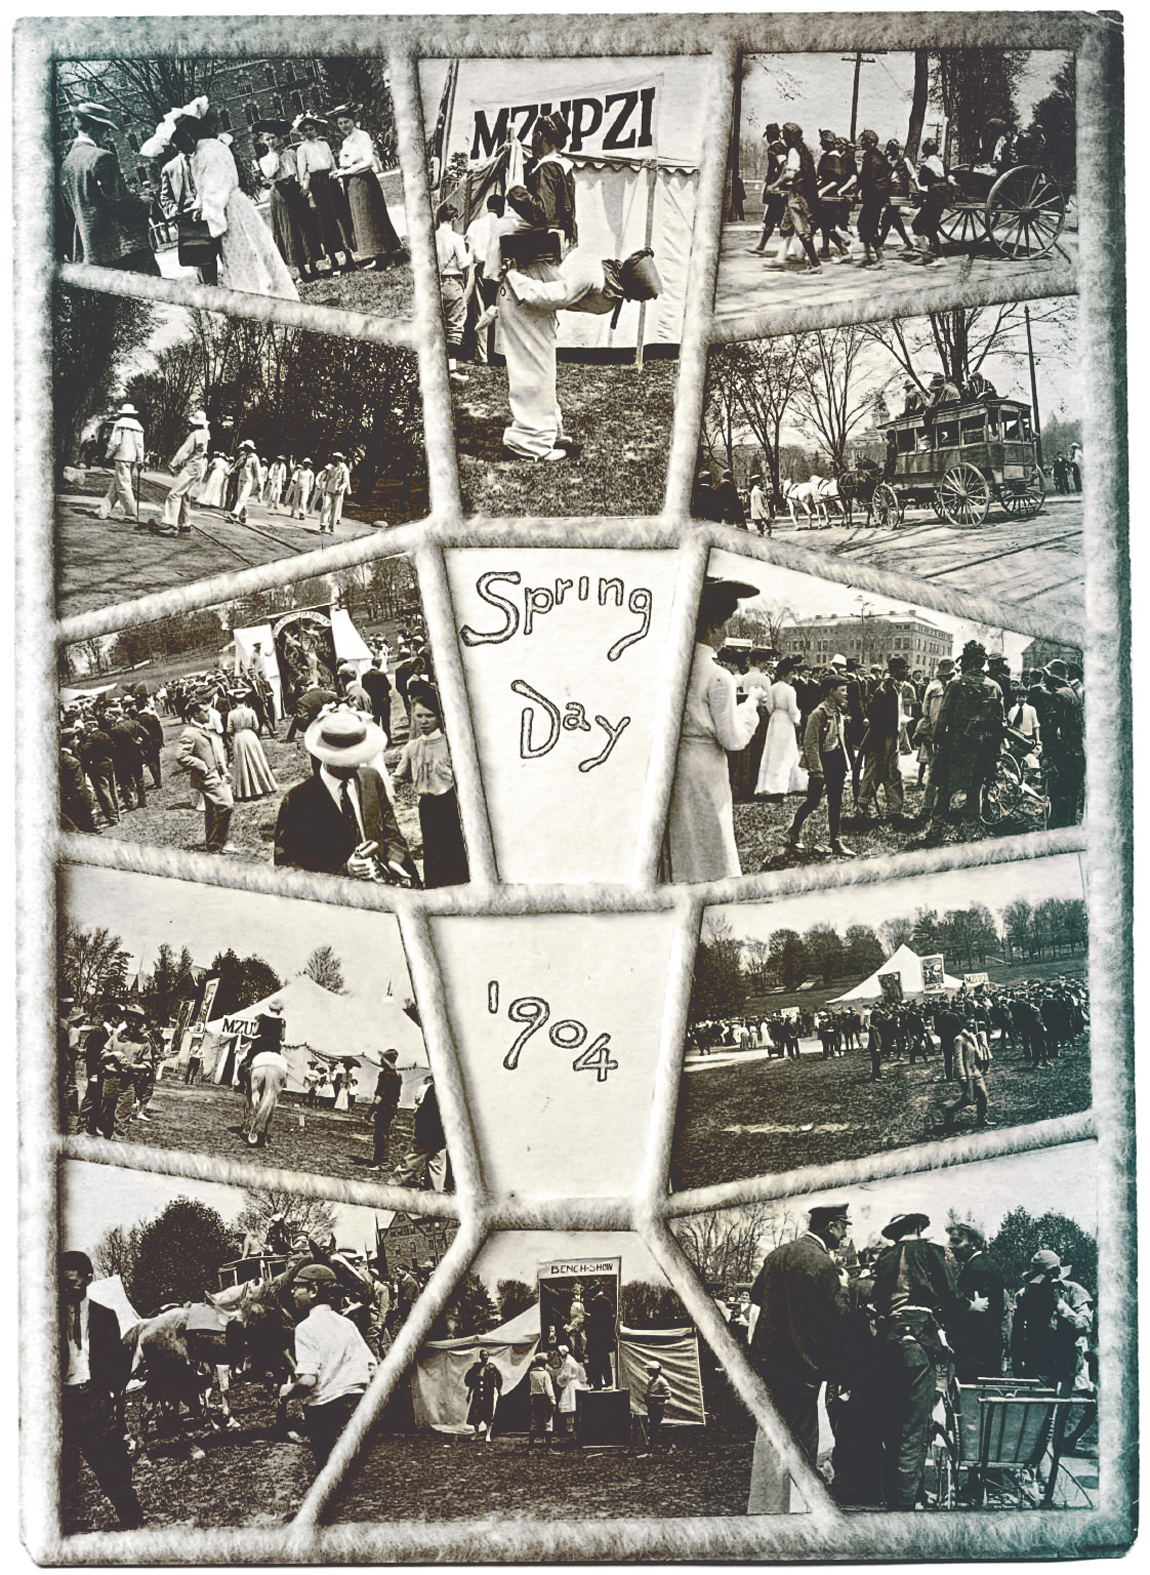 A framed photo collage of 1904 Spring Day images